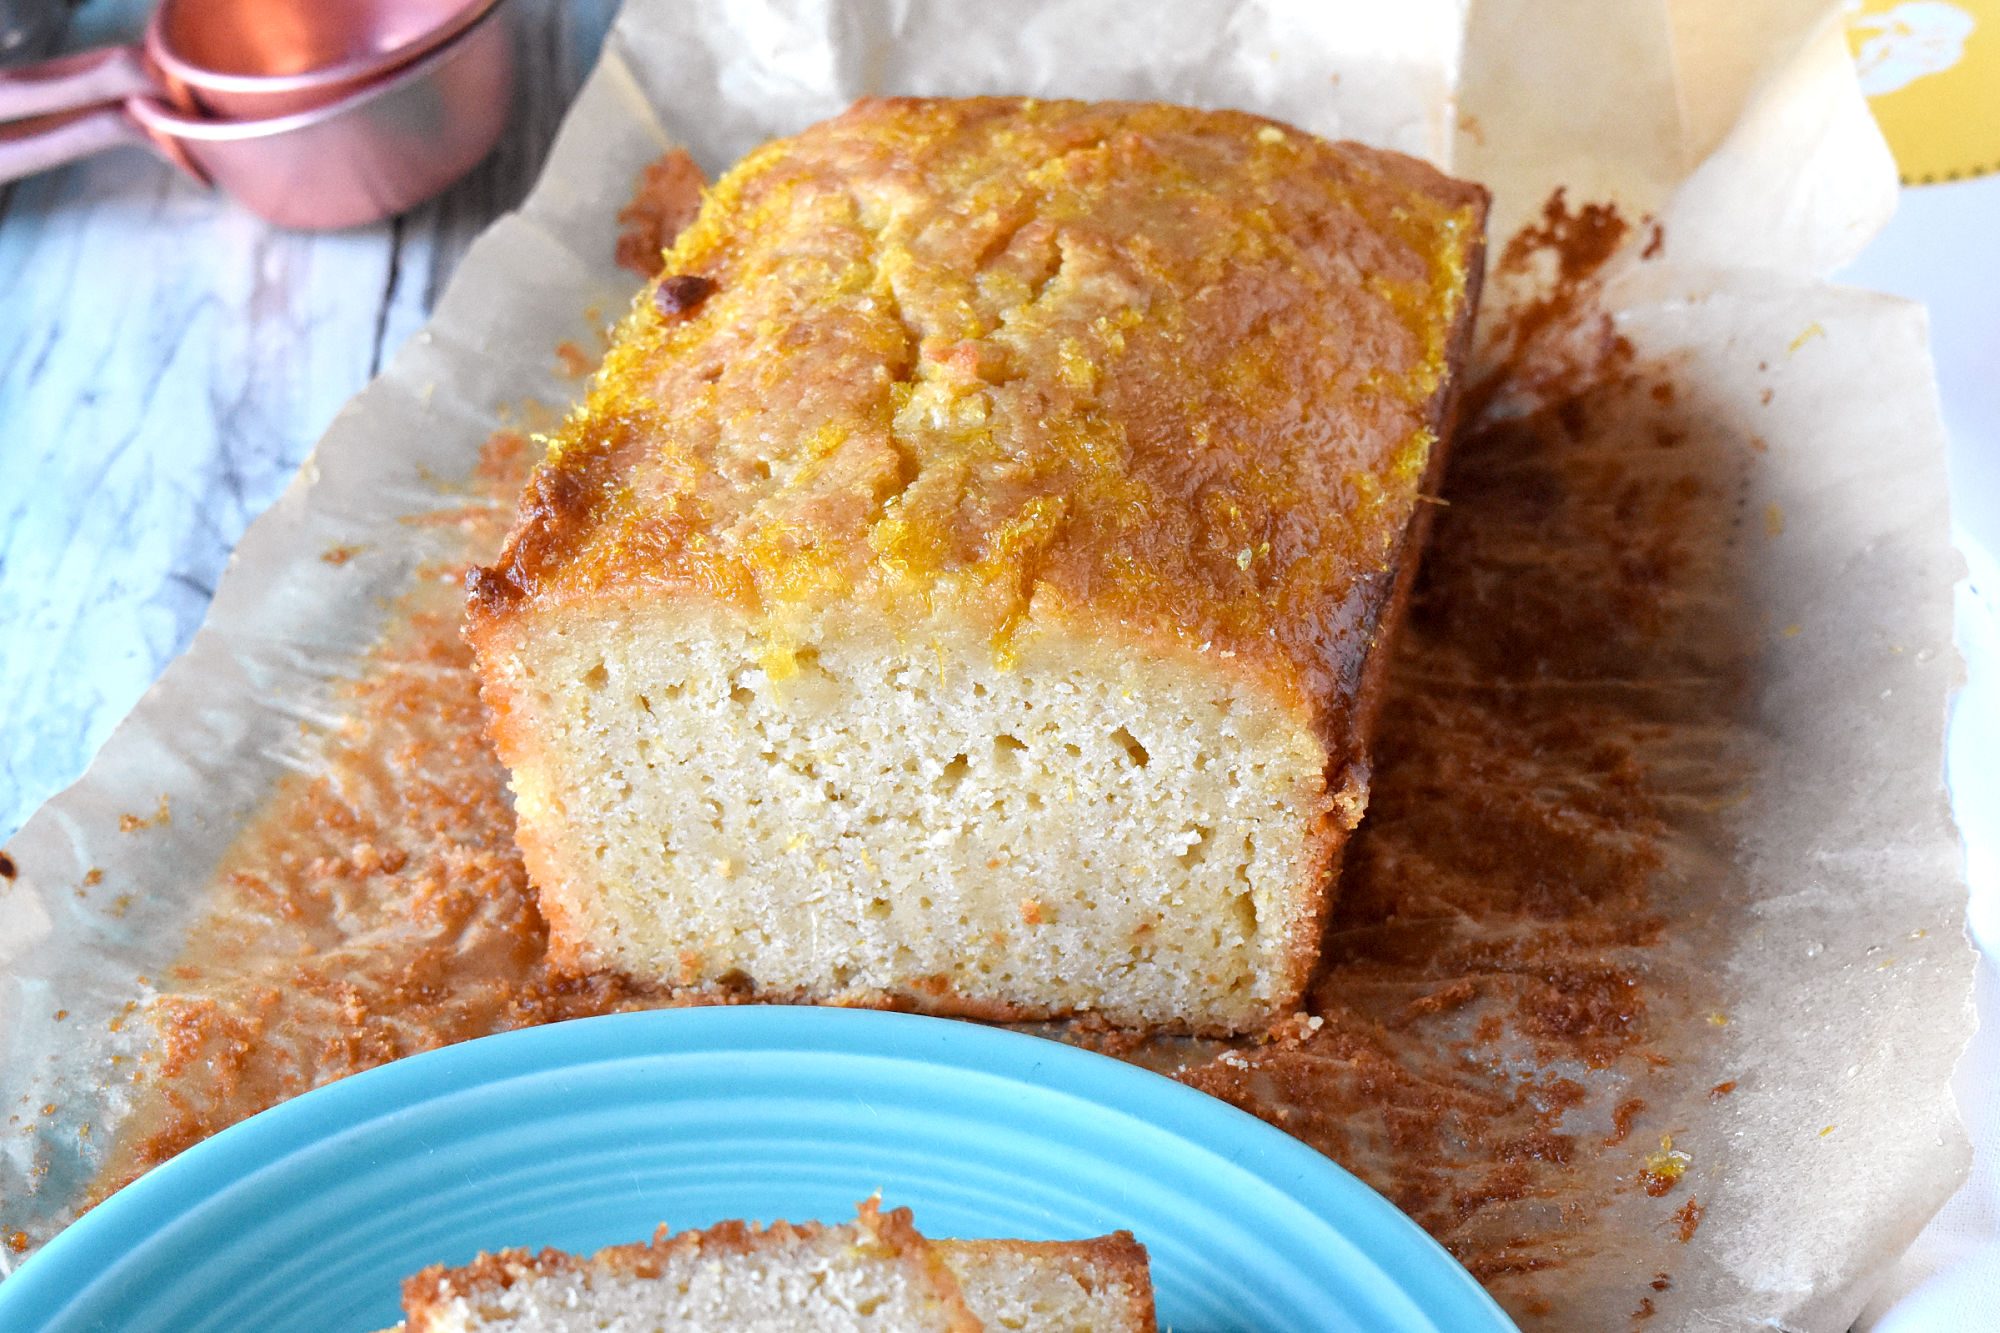 Indulge in a burst of tangy sweetness with every bite of our Moist Meyer Lemon Loaf ???? Perfect for a summer picnic or an afternoon treat. #SpringSweetsWeek #MeyerLemonLove #CitrusSweets #MoistandDelicious #BakingGoals #LusciousLoaf
